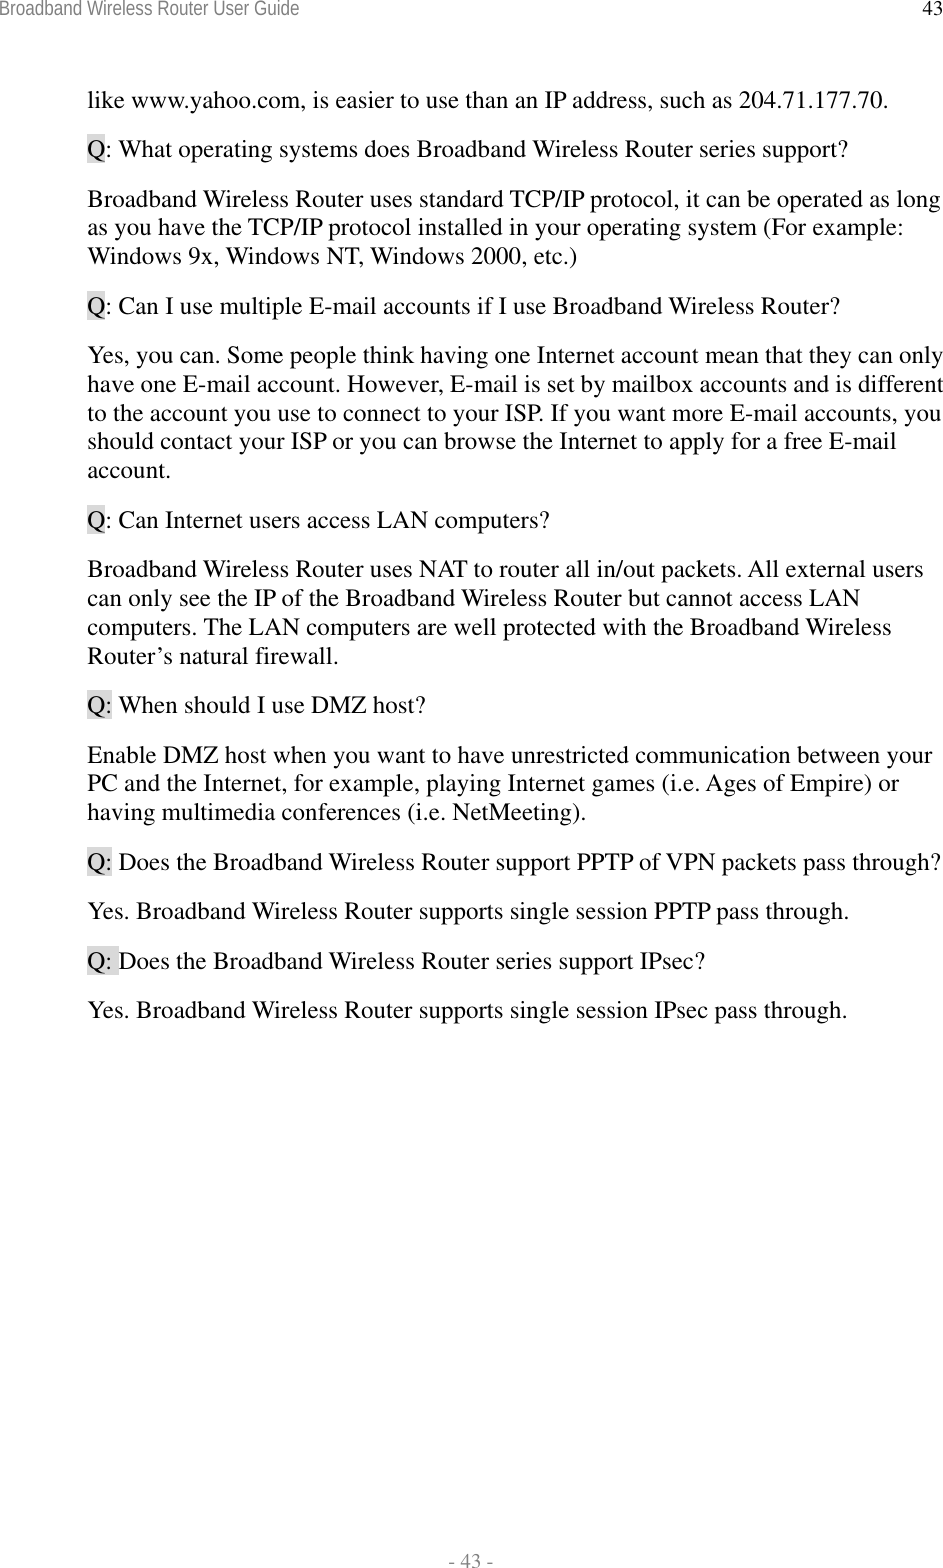 Broadband Wireless Router User Guide  - 43 - 43like www.yahoo.com, is easier to use than an IP address, such as 204.71.177.70. Q: What operating systems does Broadband Wireless Router series support? Broadband Wireless Router uses standard TCP/IP protocol, it can be operated as long as you have the TCP/IP protocol installed in your operating system (For example: Windows 9x, Windows NT, Windows 2000, etc.) Q: Can I use multiple E-mail accounts if I use Broadband Wireless Router? Yes, you can. Some people think having one Internet account mean that they can only have one E-mail account. However, E-mail is set by mailbox accounts and is different to the account you use to connect to your ISP. If you want more E-mail accounts, you should contact your ISP or you can browse the Internet to apply for a free E-mail account. Q: Can Internet users access LAN computers? Broadband Wireless Router uses NAT to router all in/out packets. All external users can only see the IP of the Broadband Wireless Router but cannot access LAN computers. The LAN computers are well protected with the Broadband Wireless Router’s natural firewall. Q: When should I use DMZ host? Enable DMZ host when you want to have unrestricted communication between your PC and the Internet, for example, playing Internet games (i.e. Ages of Empire) or having multimedia conferences (i.e. NetMeeting). Q: Does the Broadband Wireless Router support PPTP of VPN packets pass through? Yes. Broadband Wireless Router supports single session PPTP pass through. Q: Does the Broadband Wireless Router series support IPsec? Yes. Broadband Wireless Router supports single session IPsec pass through.   